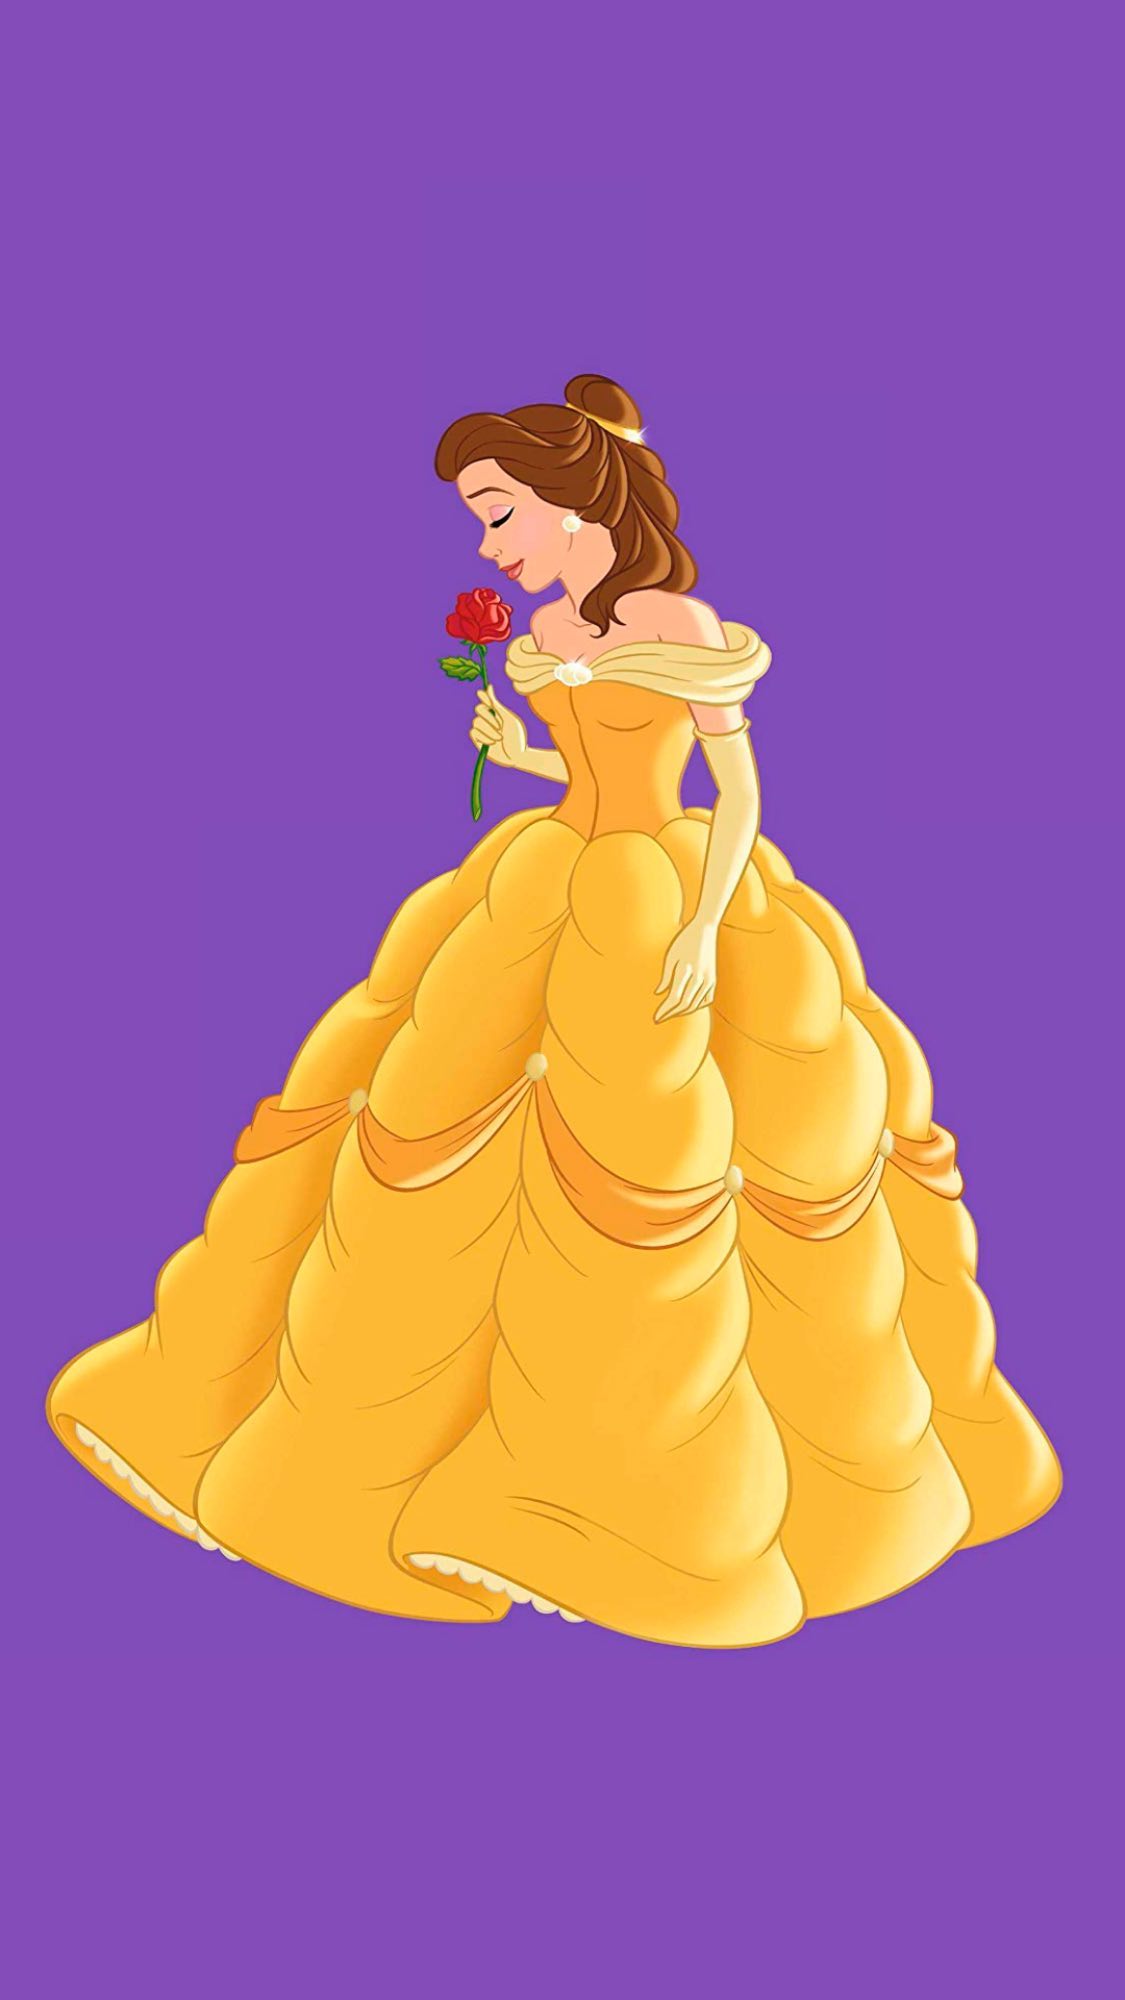 Belle from Beauty and the Beast holding a rose. - Belle